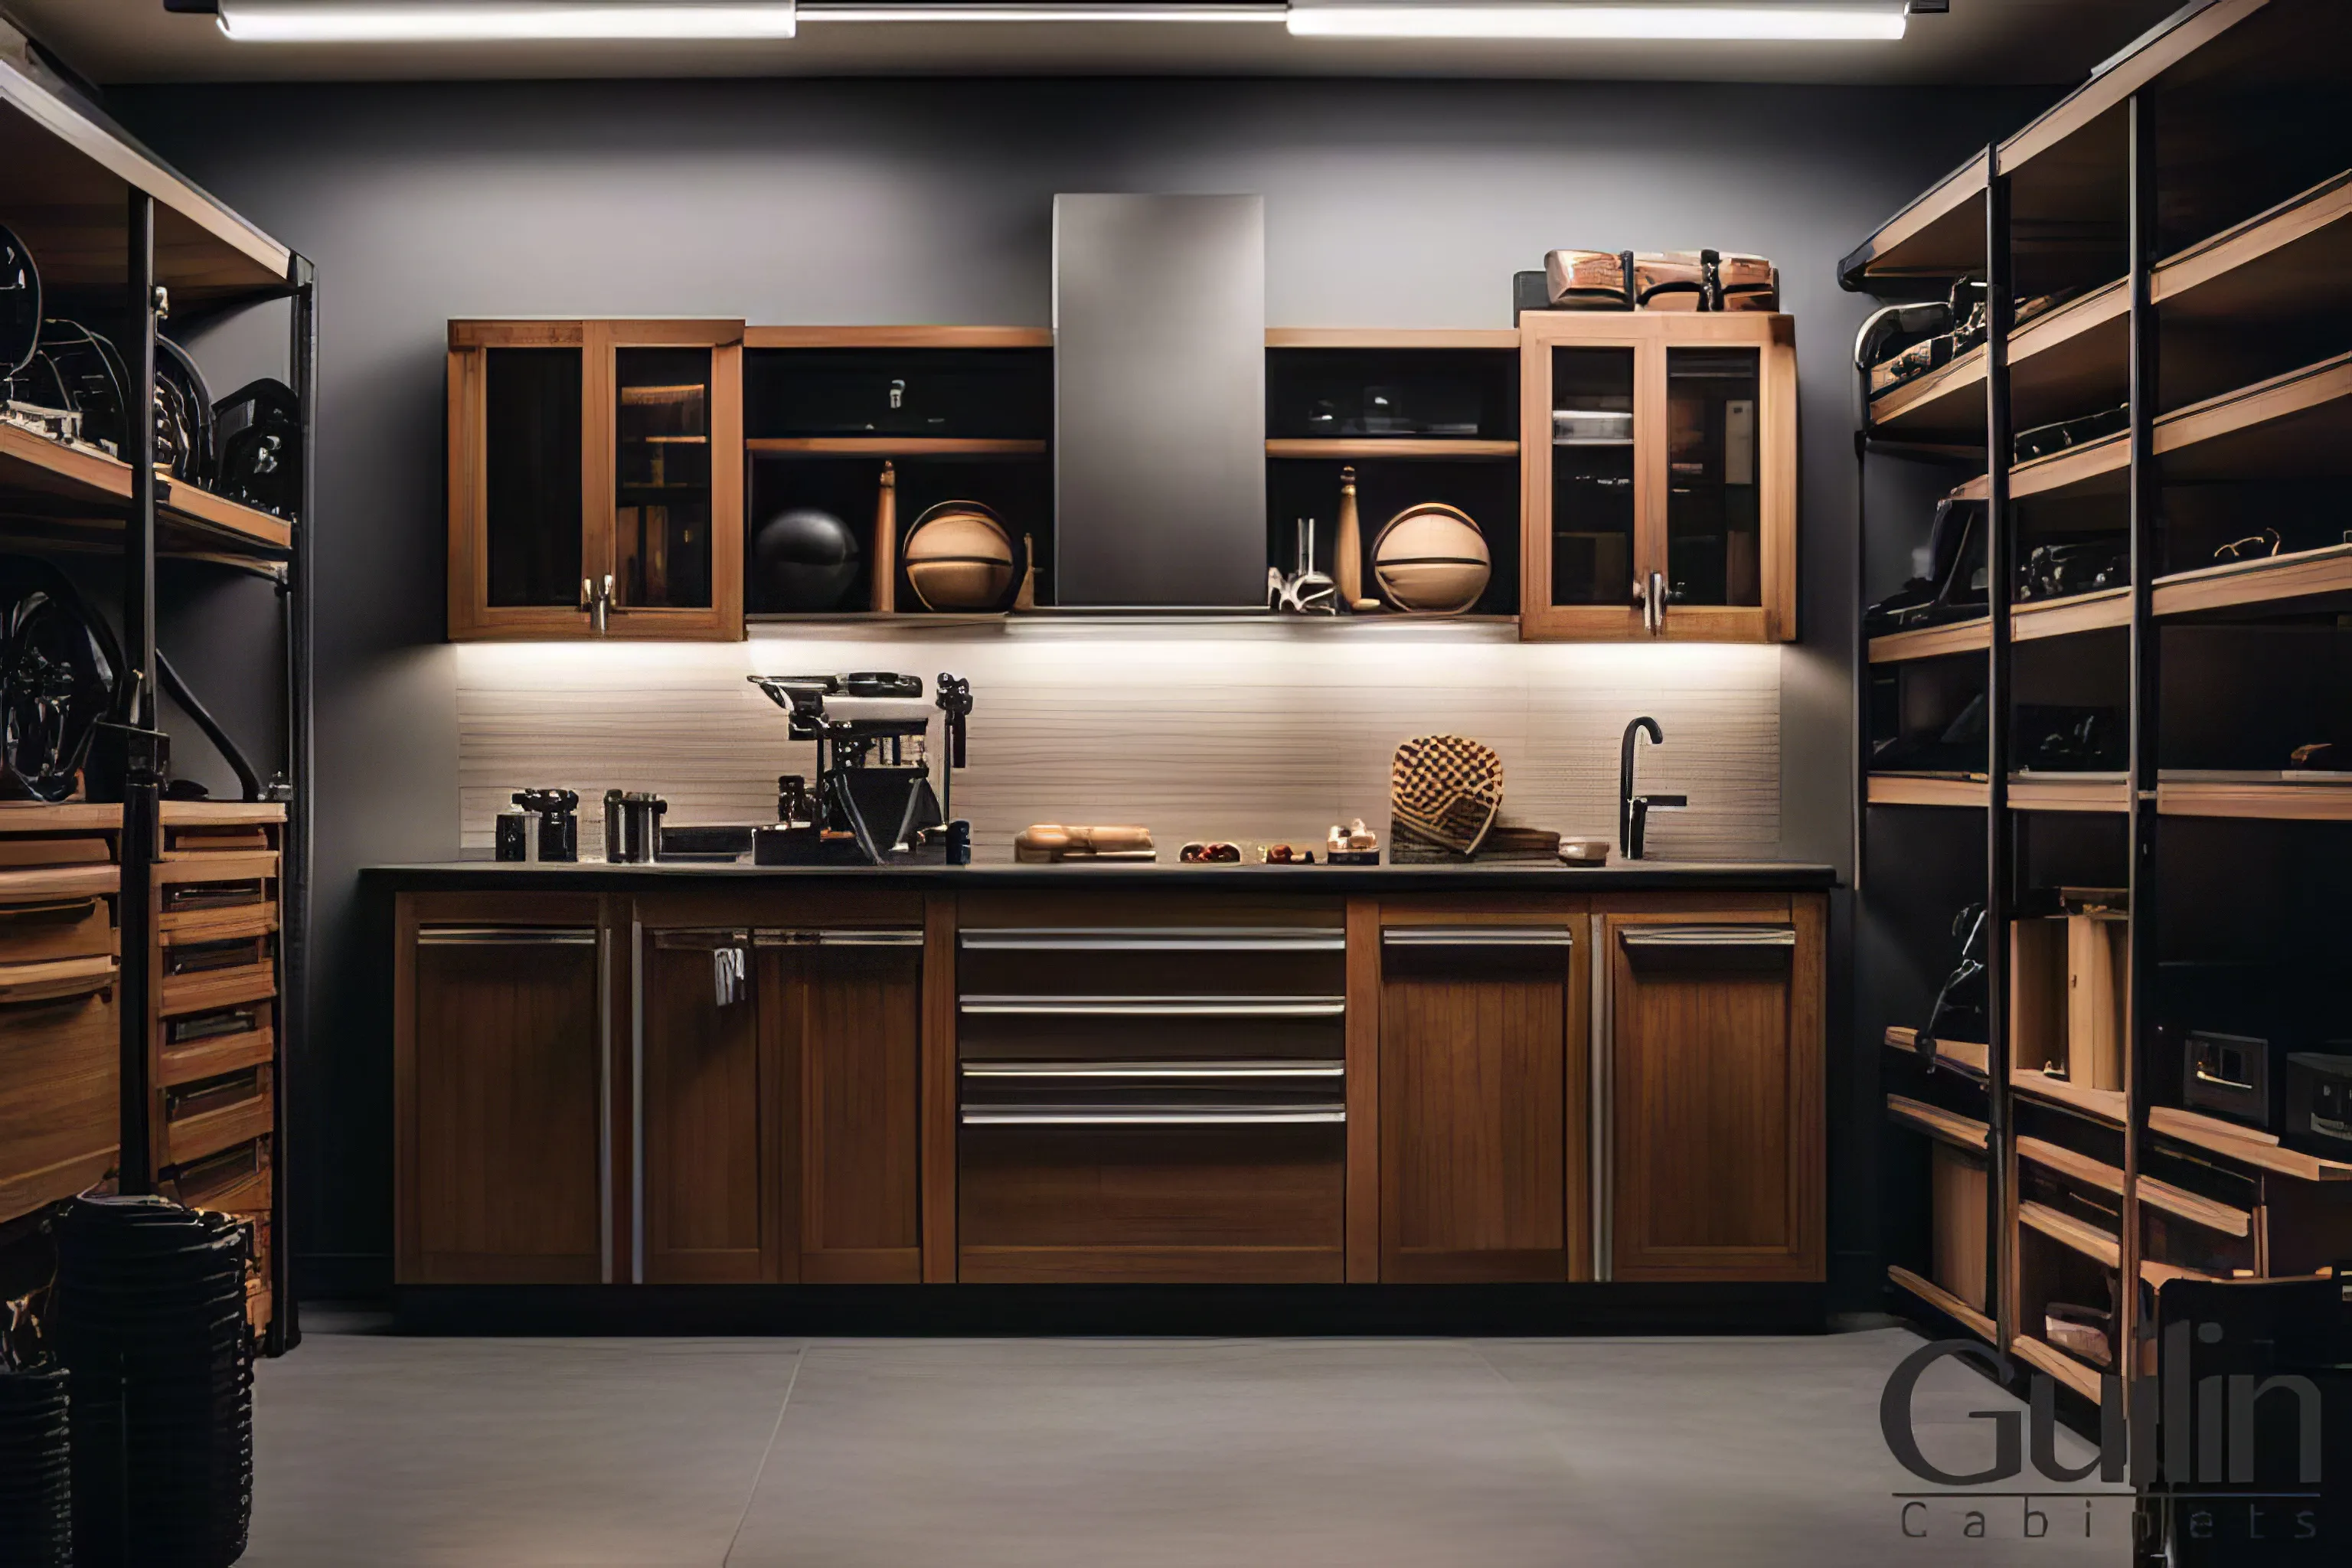 garage cabinetry options 5 types that work best 3 Better